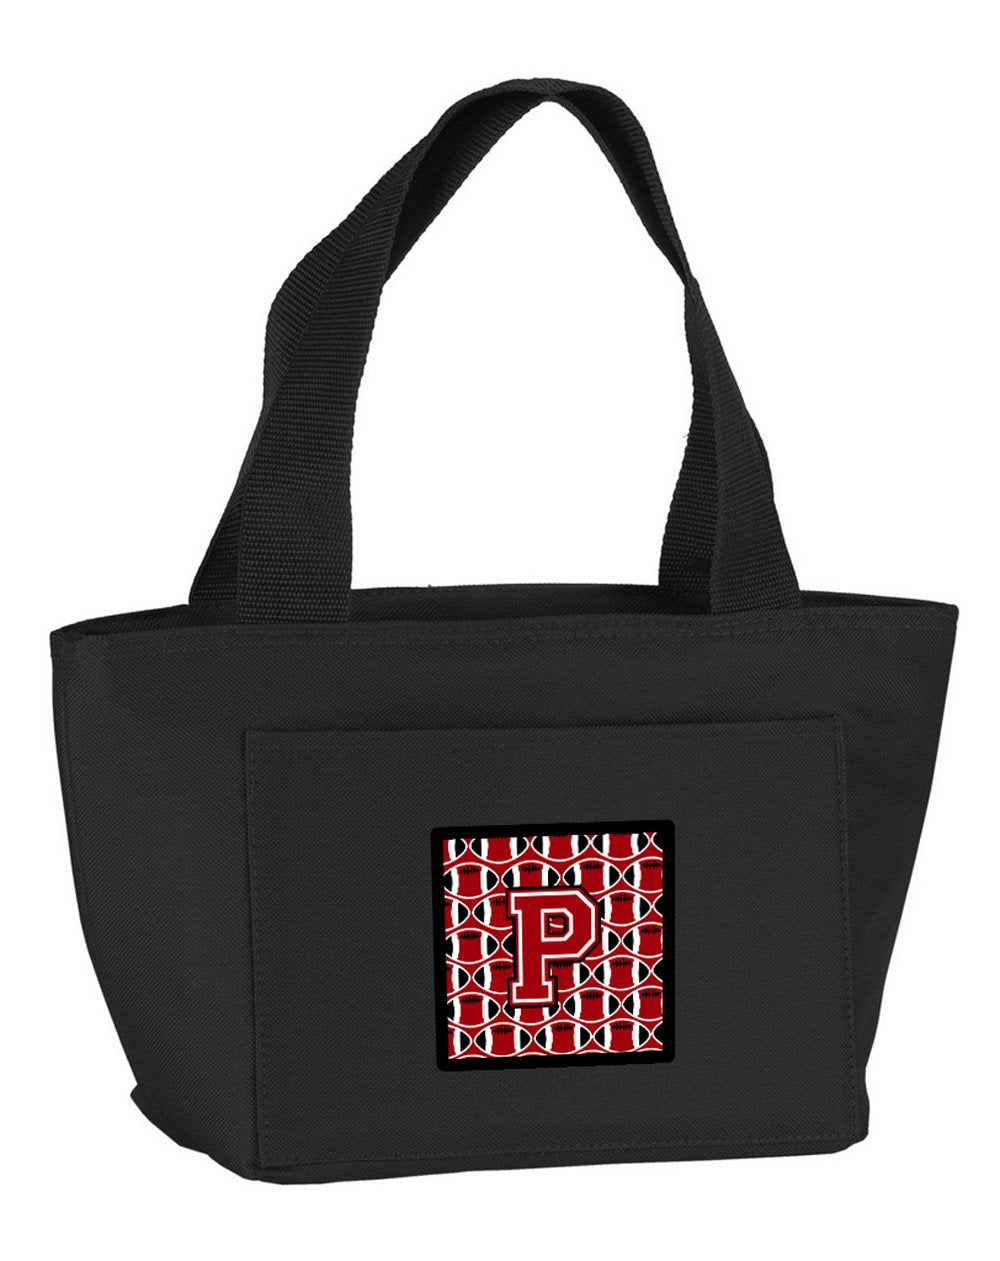 Letter P Football Red, Black and White Lunch Bag CJ1073-PBK-8808 by Caroline's Treasures